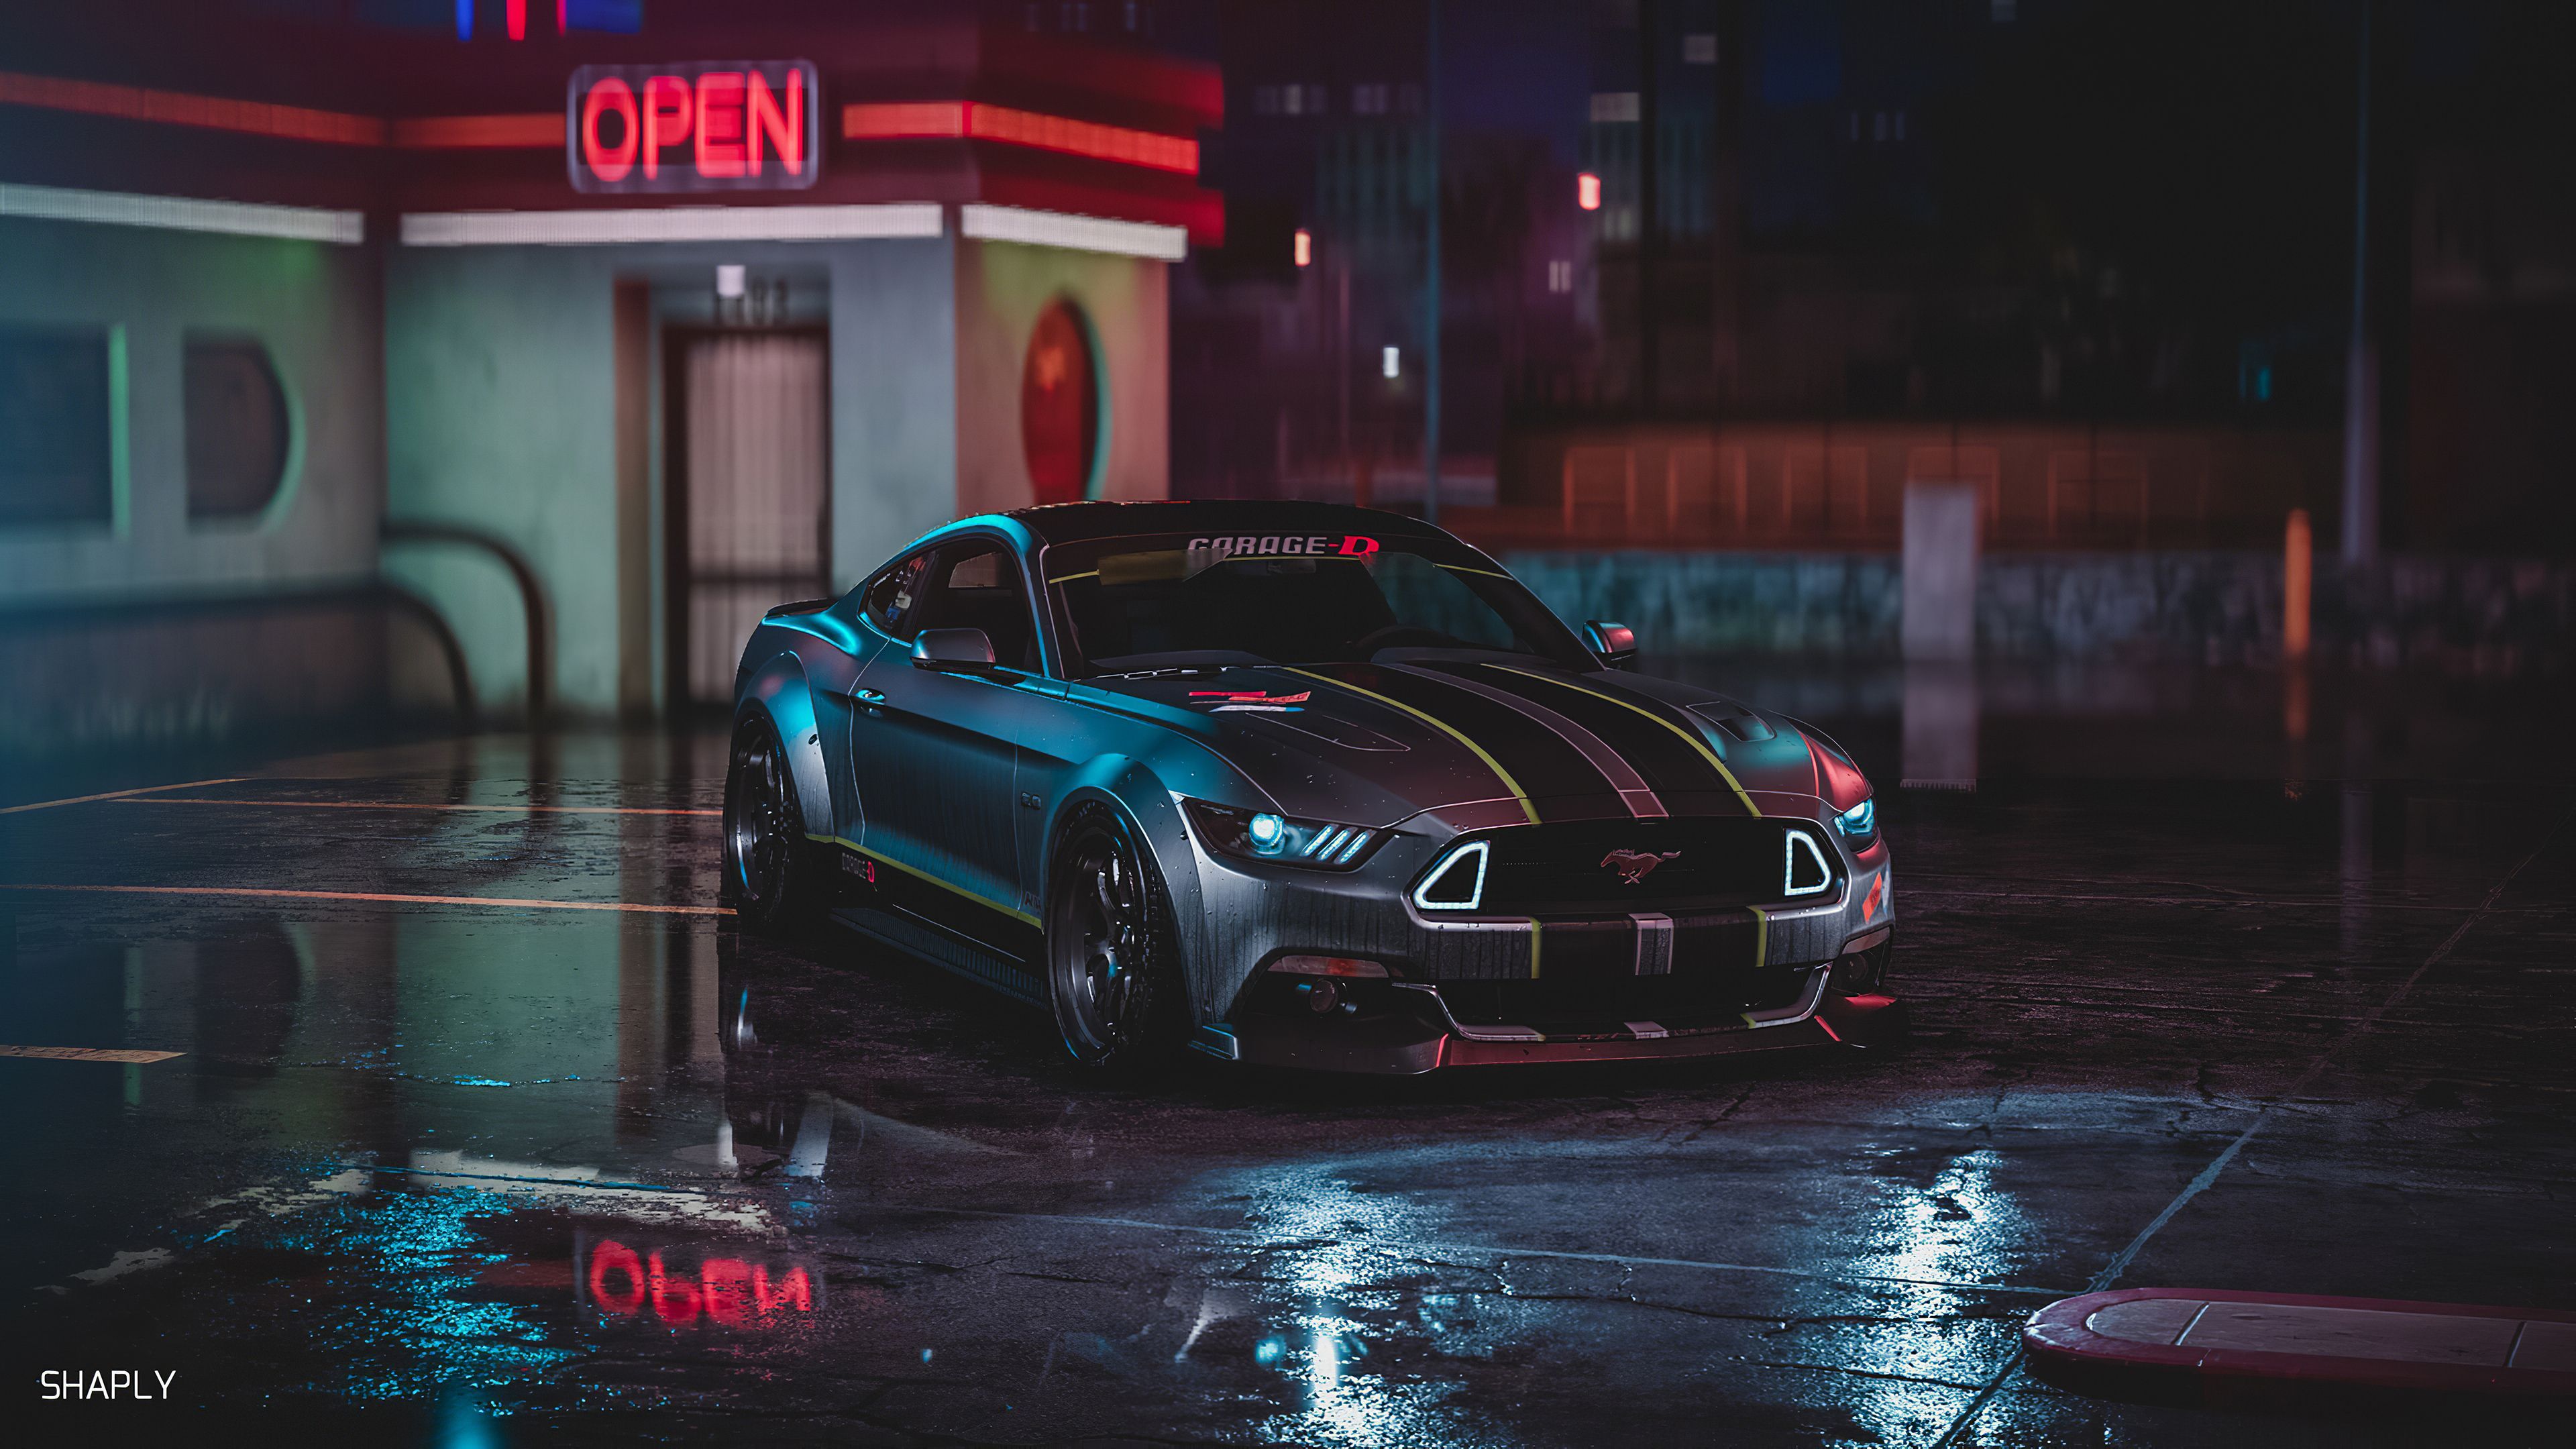 Ford Mustang Gt Neon Harmony Hd Wallpaper, Ford Wallpaper, Ford Mustang Wallpaper, Cars Wallpaper, Arts. Ford Mustang, Ford Mustang Wallpaper, Ford Mustang Gt